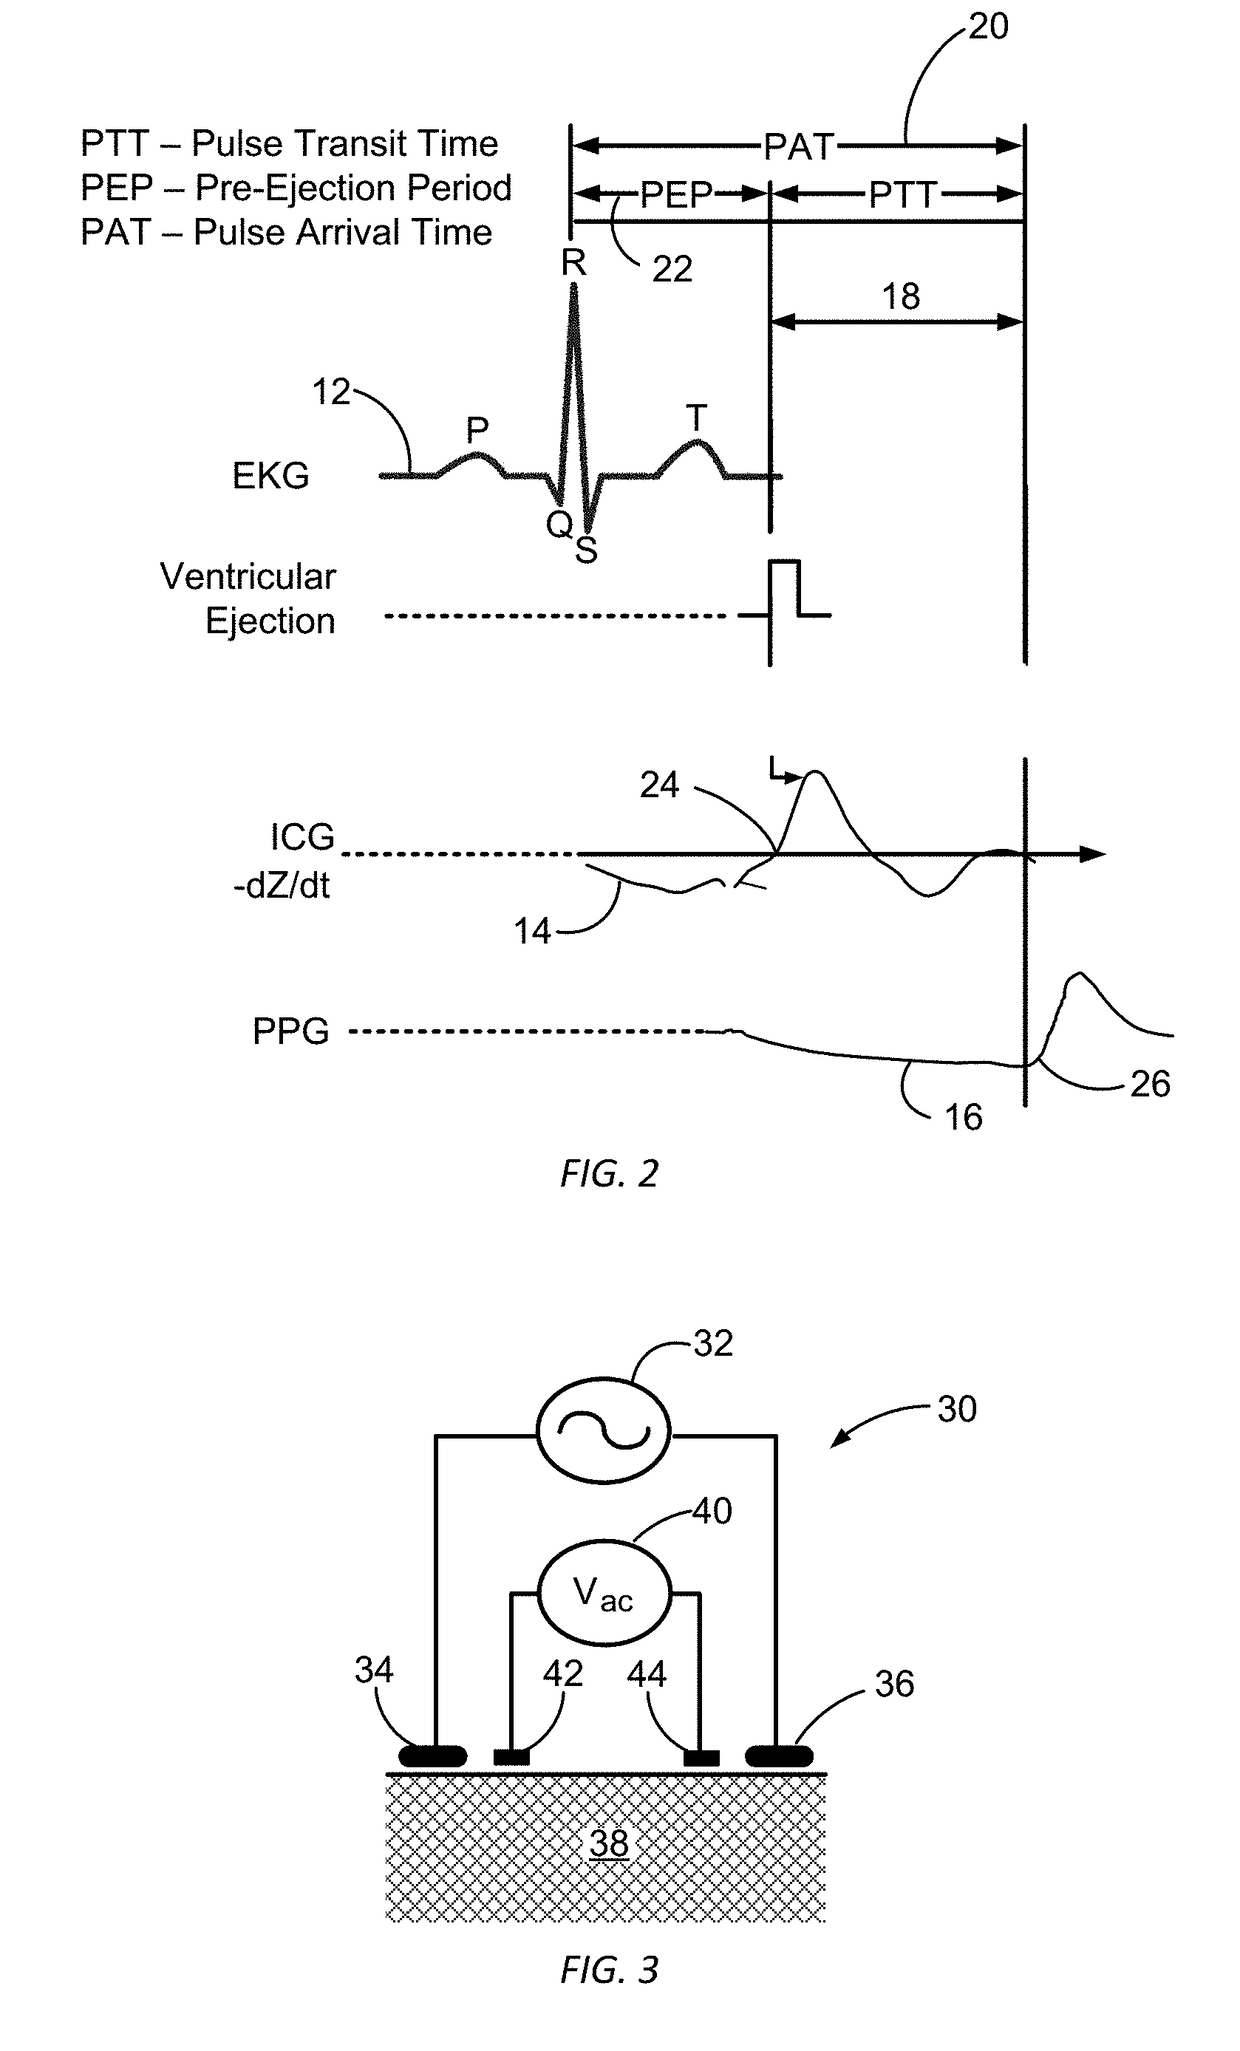 Electrical coupling of pulse transit time (PTT) measurement system to heart for blood pressure measurment